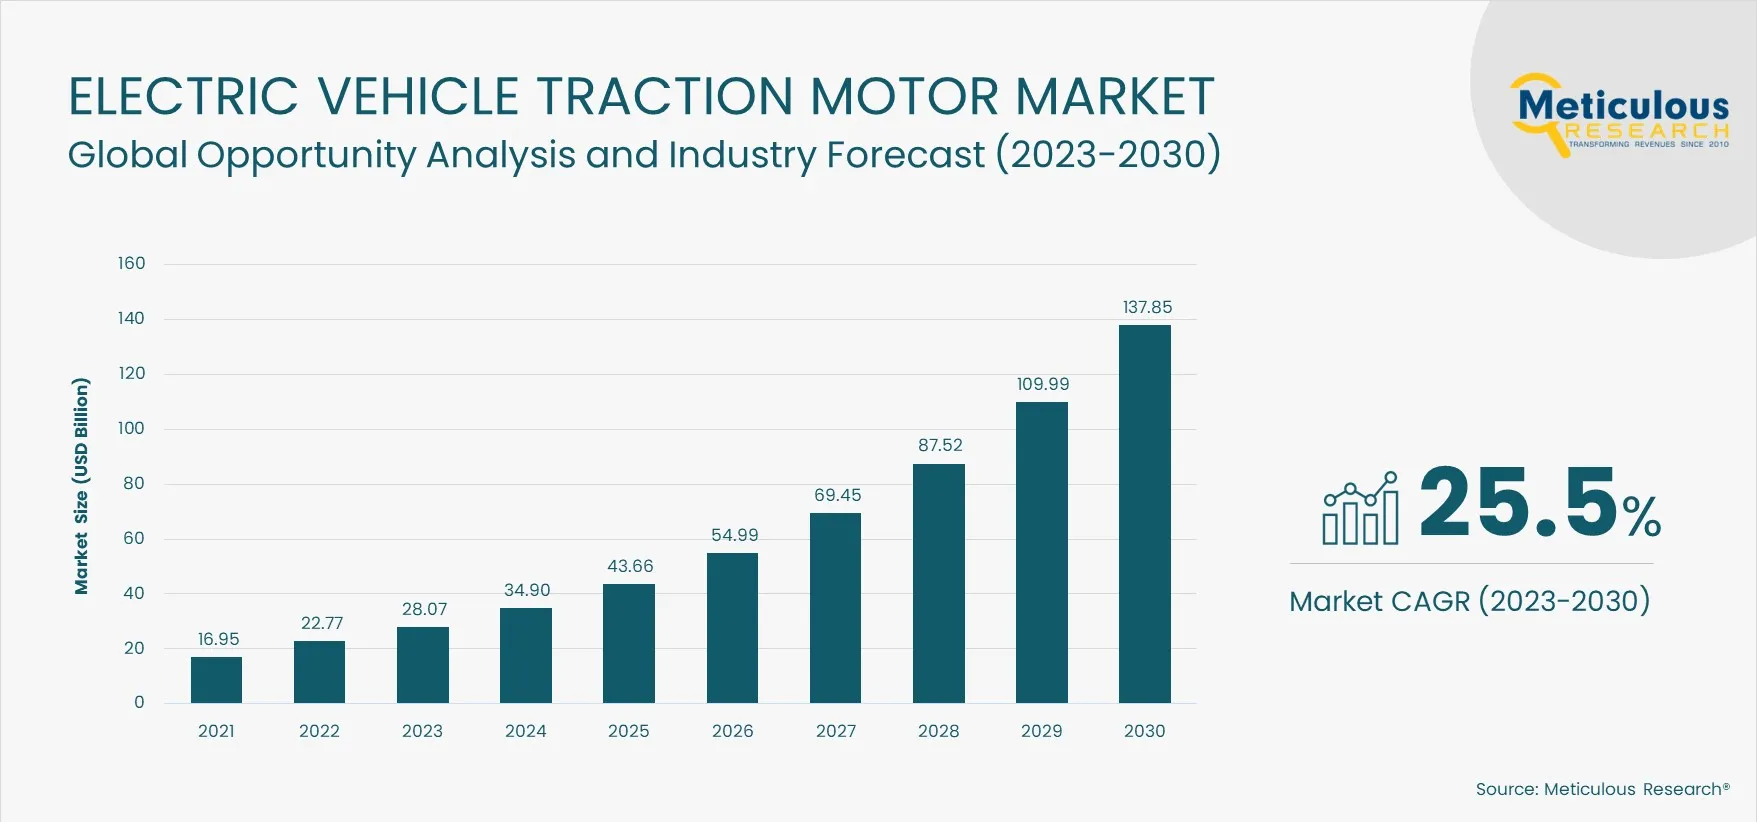  Electric Vehicle Traction Motor Market